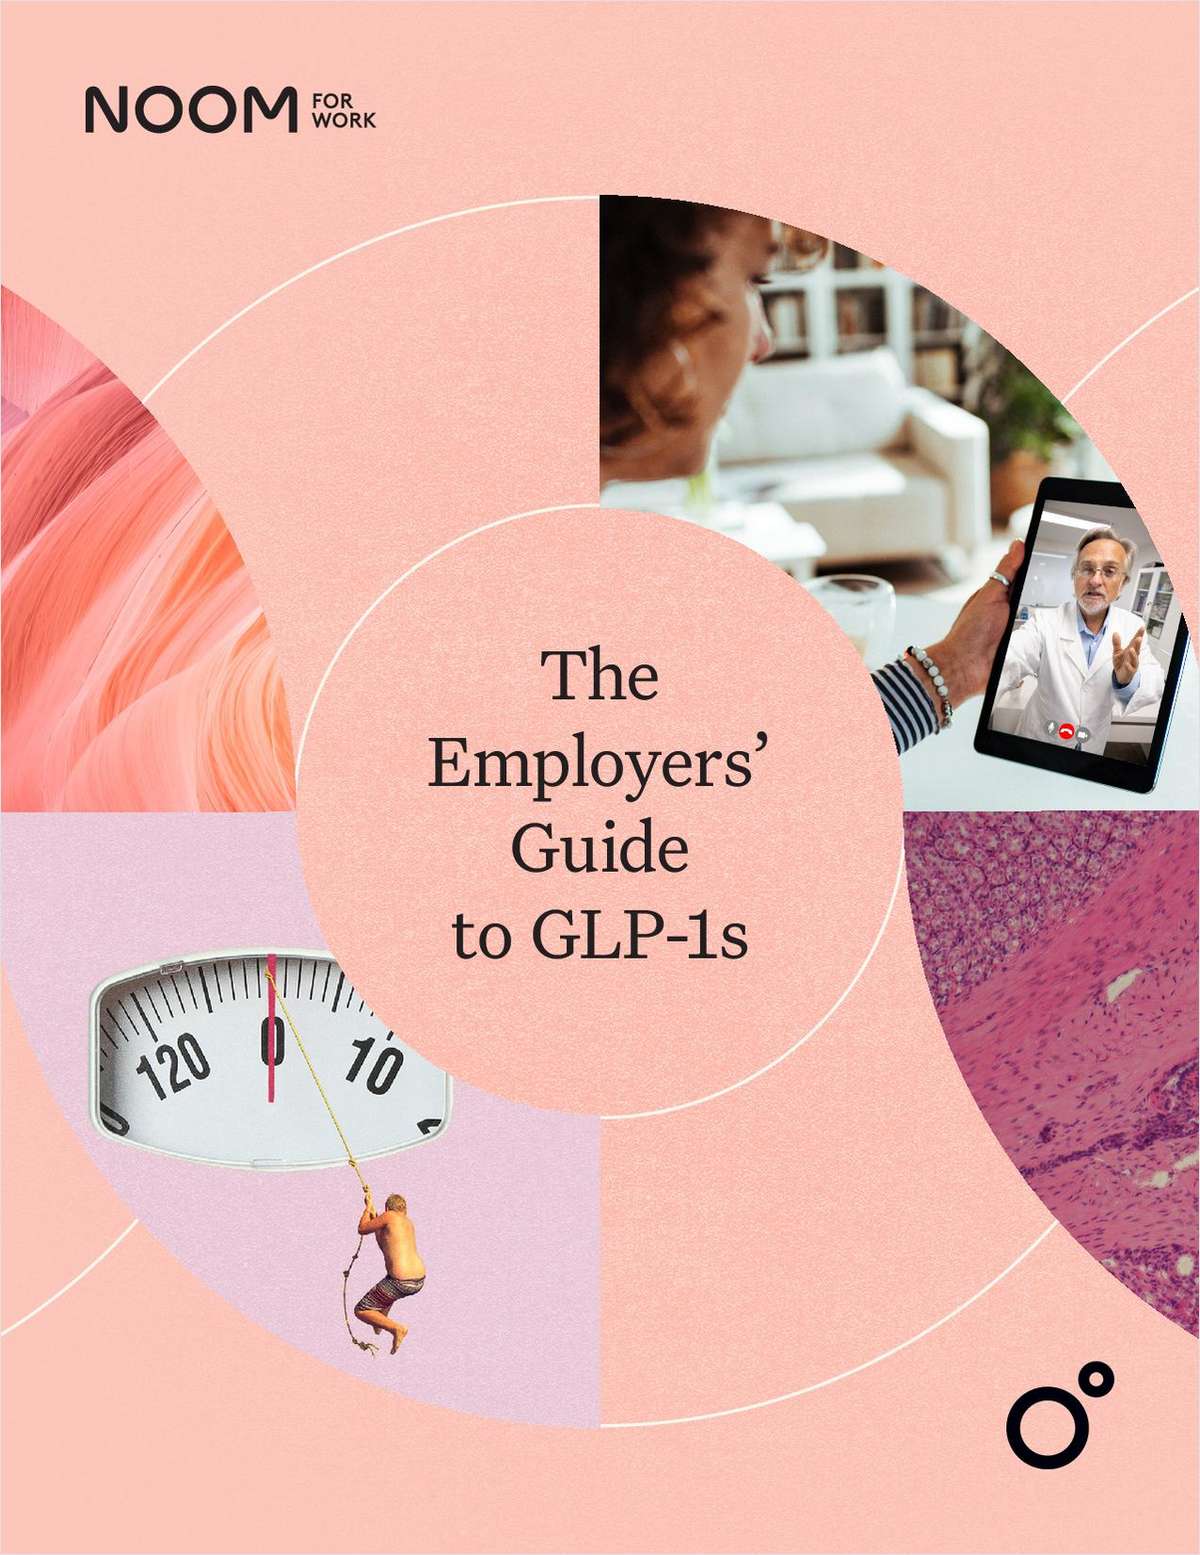 The Employers' Guide to GLP-1s link